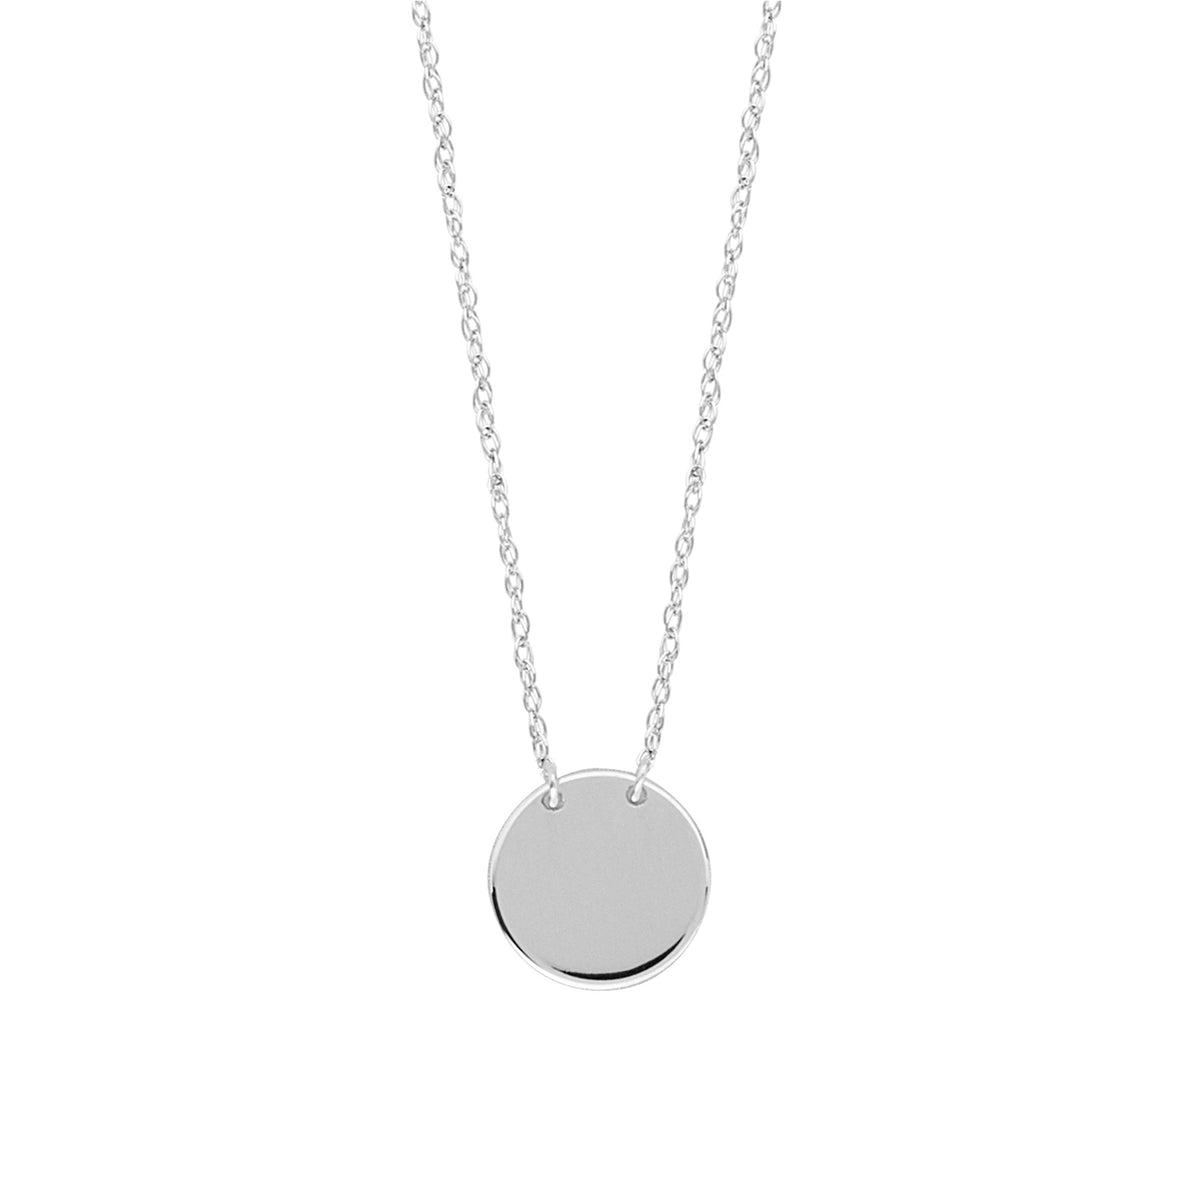 14K White Gold Mini Engravable Disk Pendant Necklace, 16" To 18" Adjustable fine designer jewelry for men and women